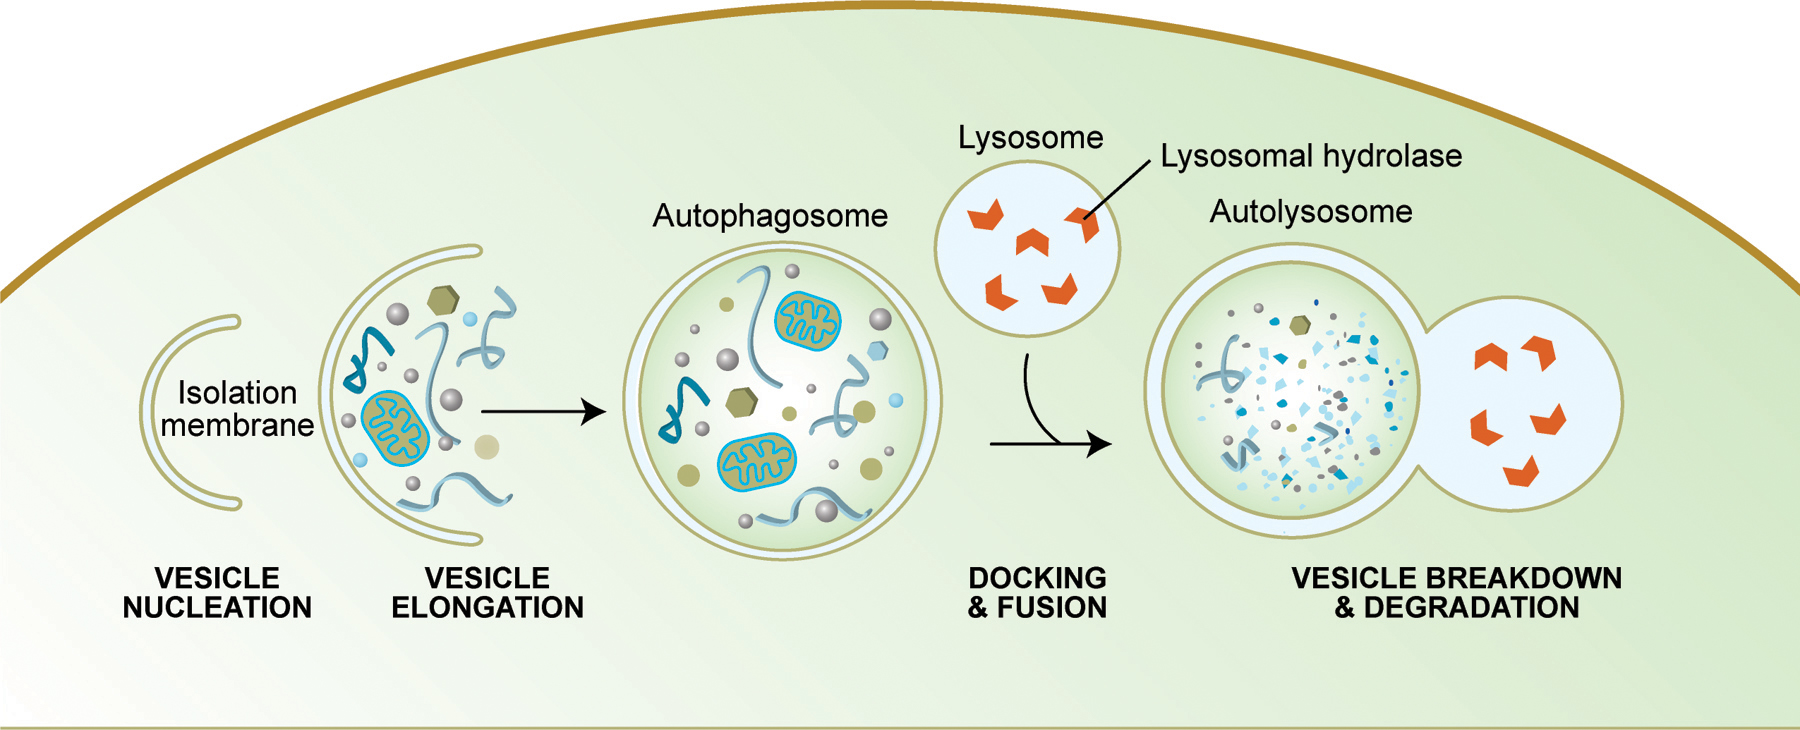 A diagram showing the stages of autophagy